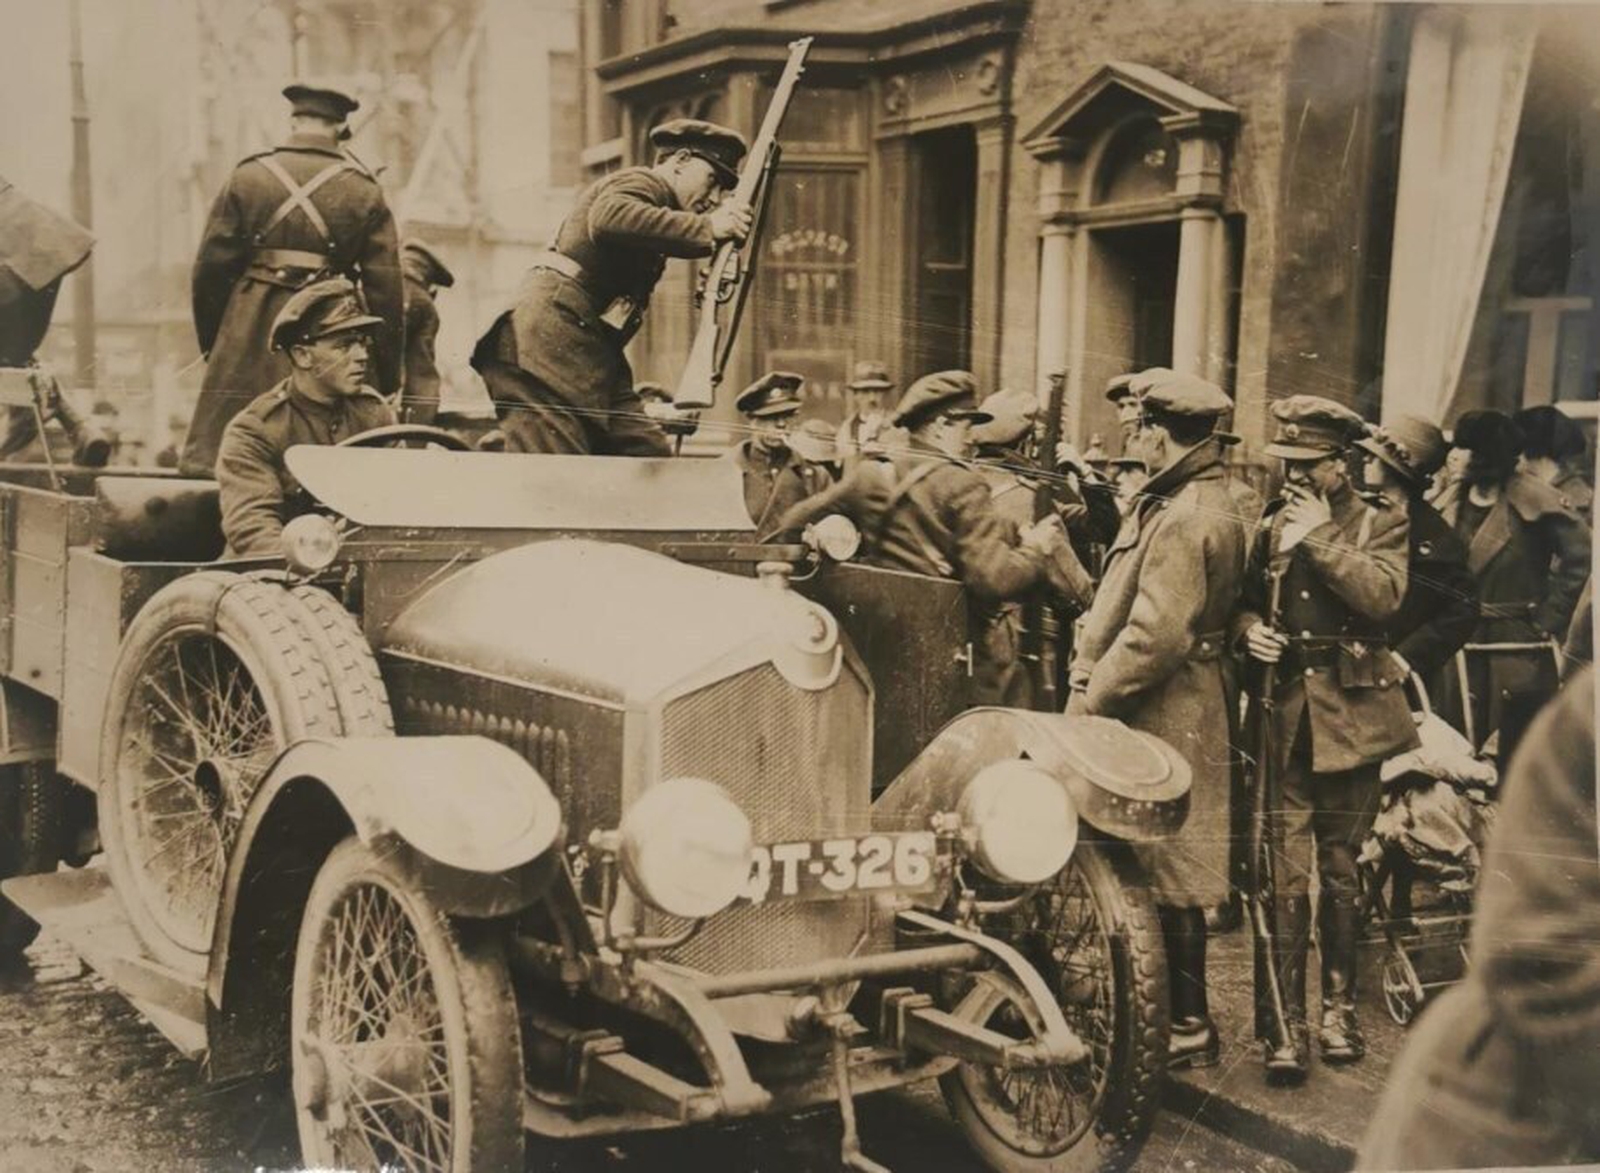 Image - ARREST: Dumbfounded civilians look on as Free State troops swarm Harry Ferguson's Garage to arrest Leo Henderson. (Credit: By permission of Conway's Yard, Oliver Plunkett Street, Cork.)